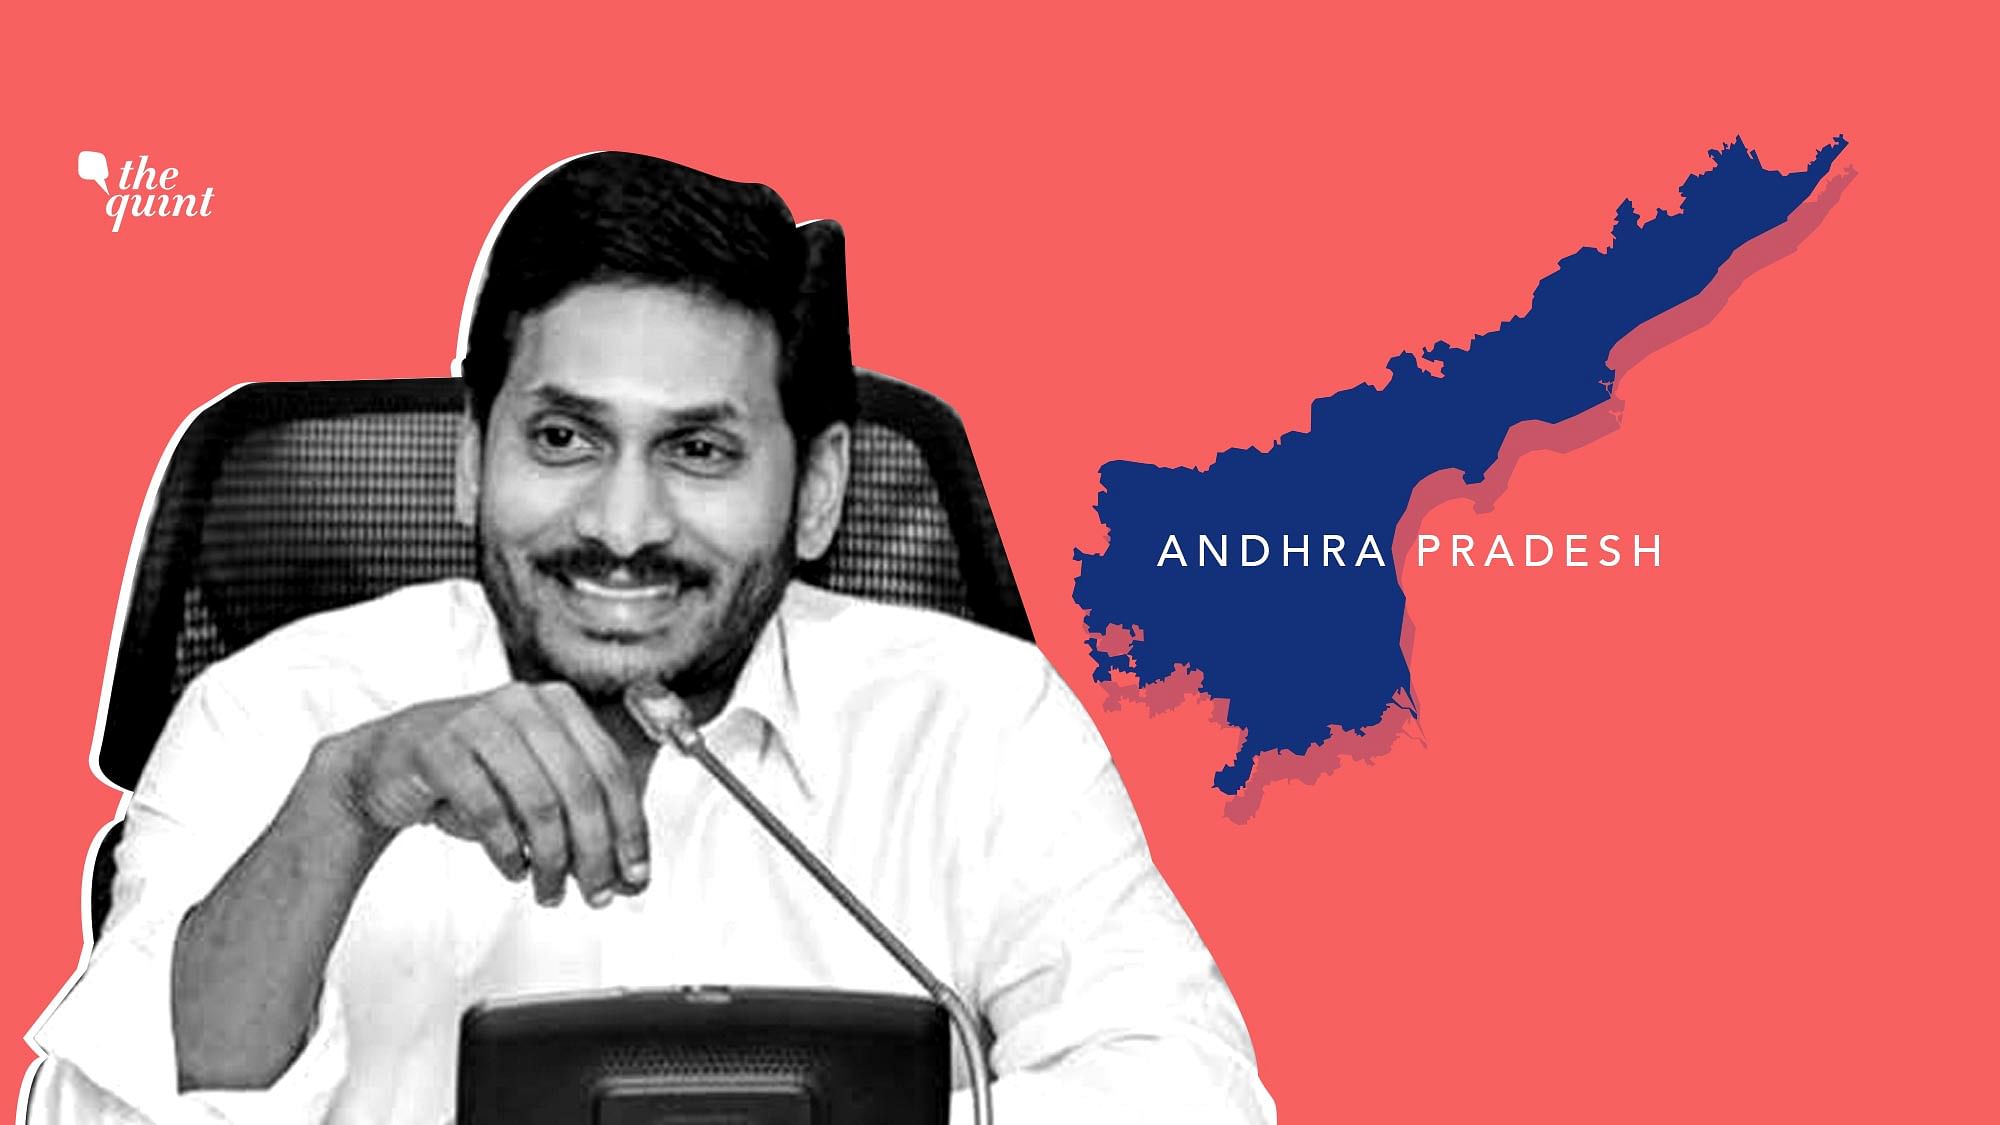 <div class="paragraphs"><p>File image of Chief Minister YS Jagan Mohan Reddy and Andhra Pradesh map, used for representational purposes.</p></div>